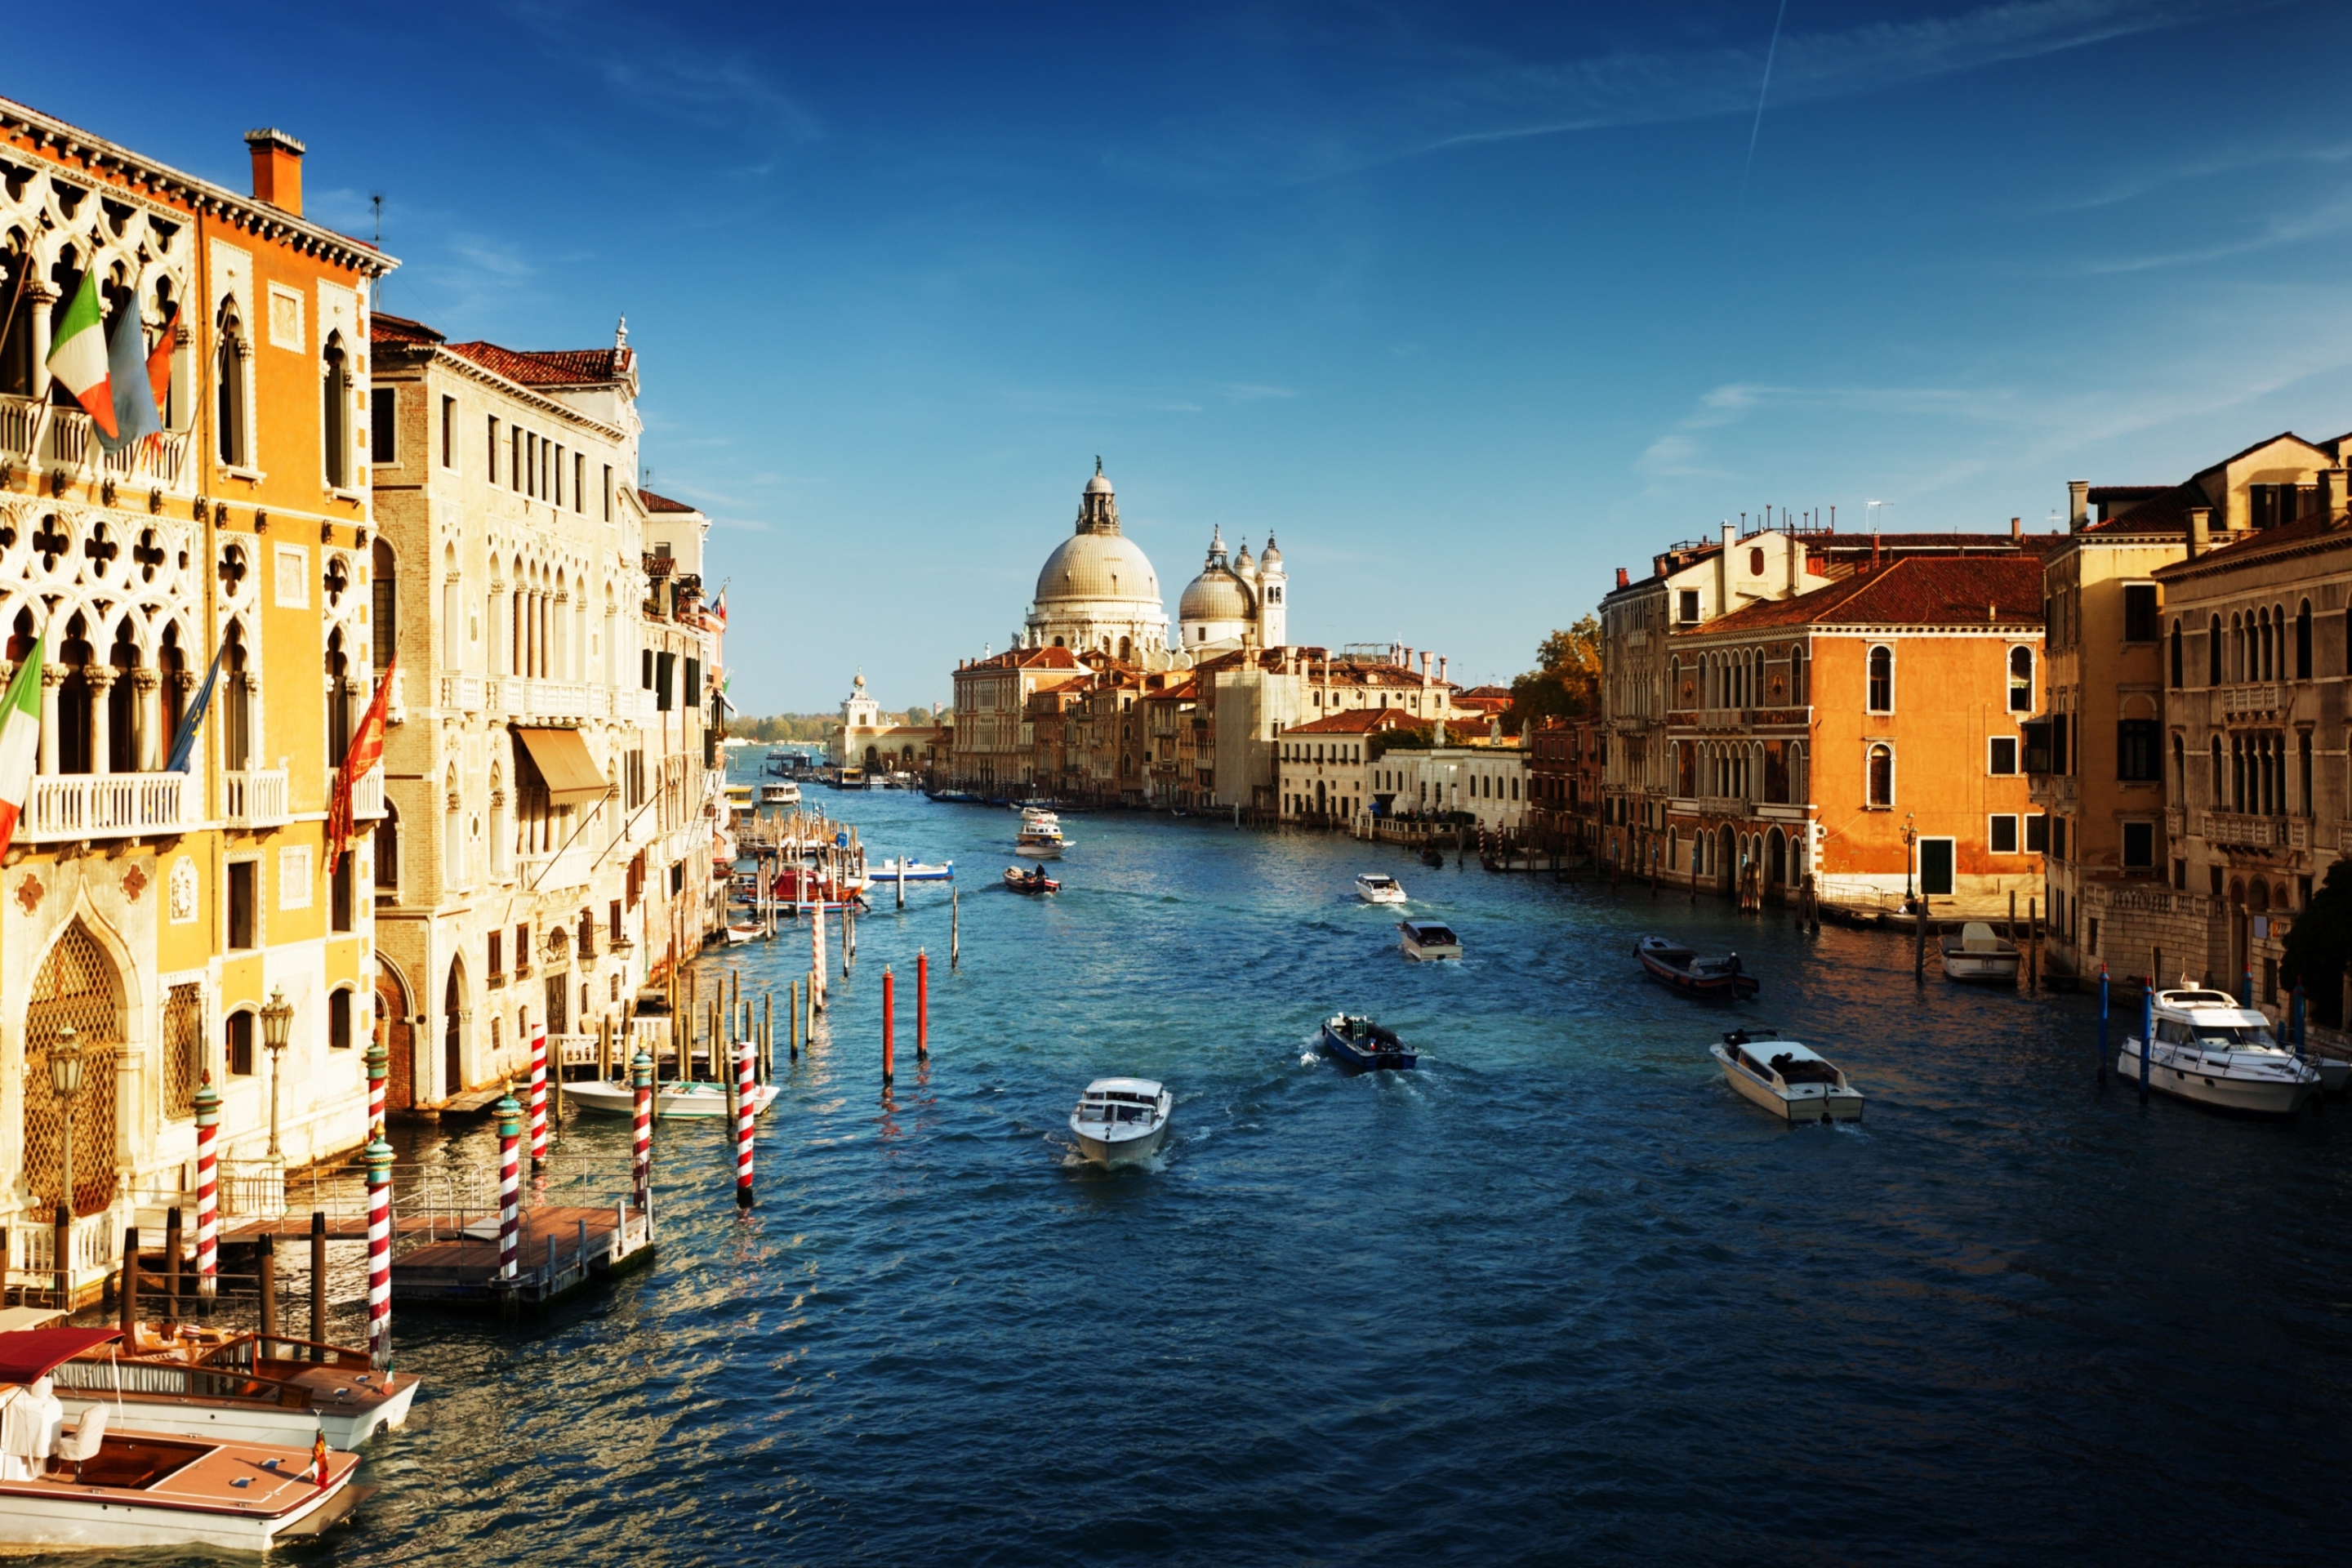 Venice, Italy, The Grand Canal screenshot #1 2880x1920